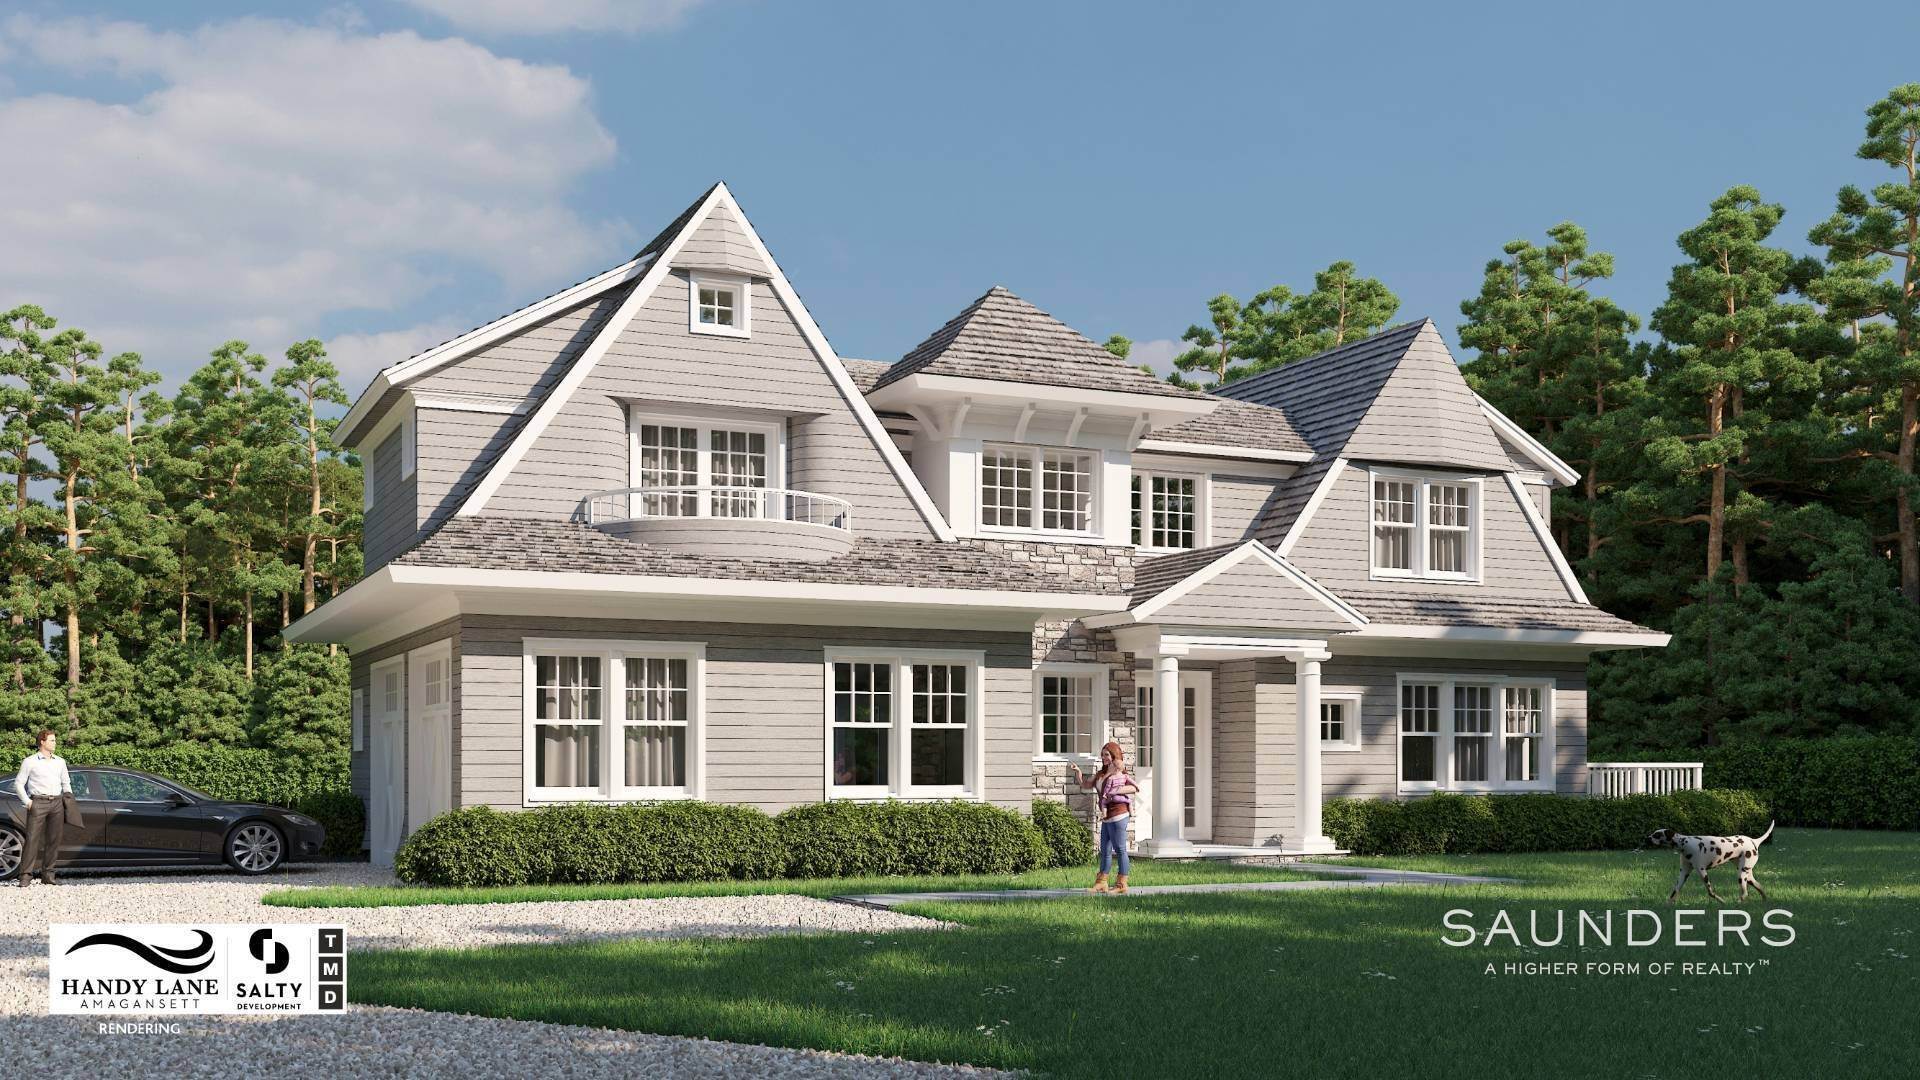 Single Family Homes for Sale at Amagansett South Of The Highway-New Construction 37 Handy Lane, Amagansett, NY 11930